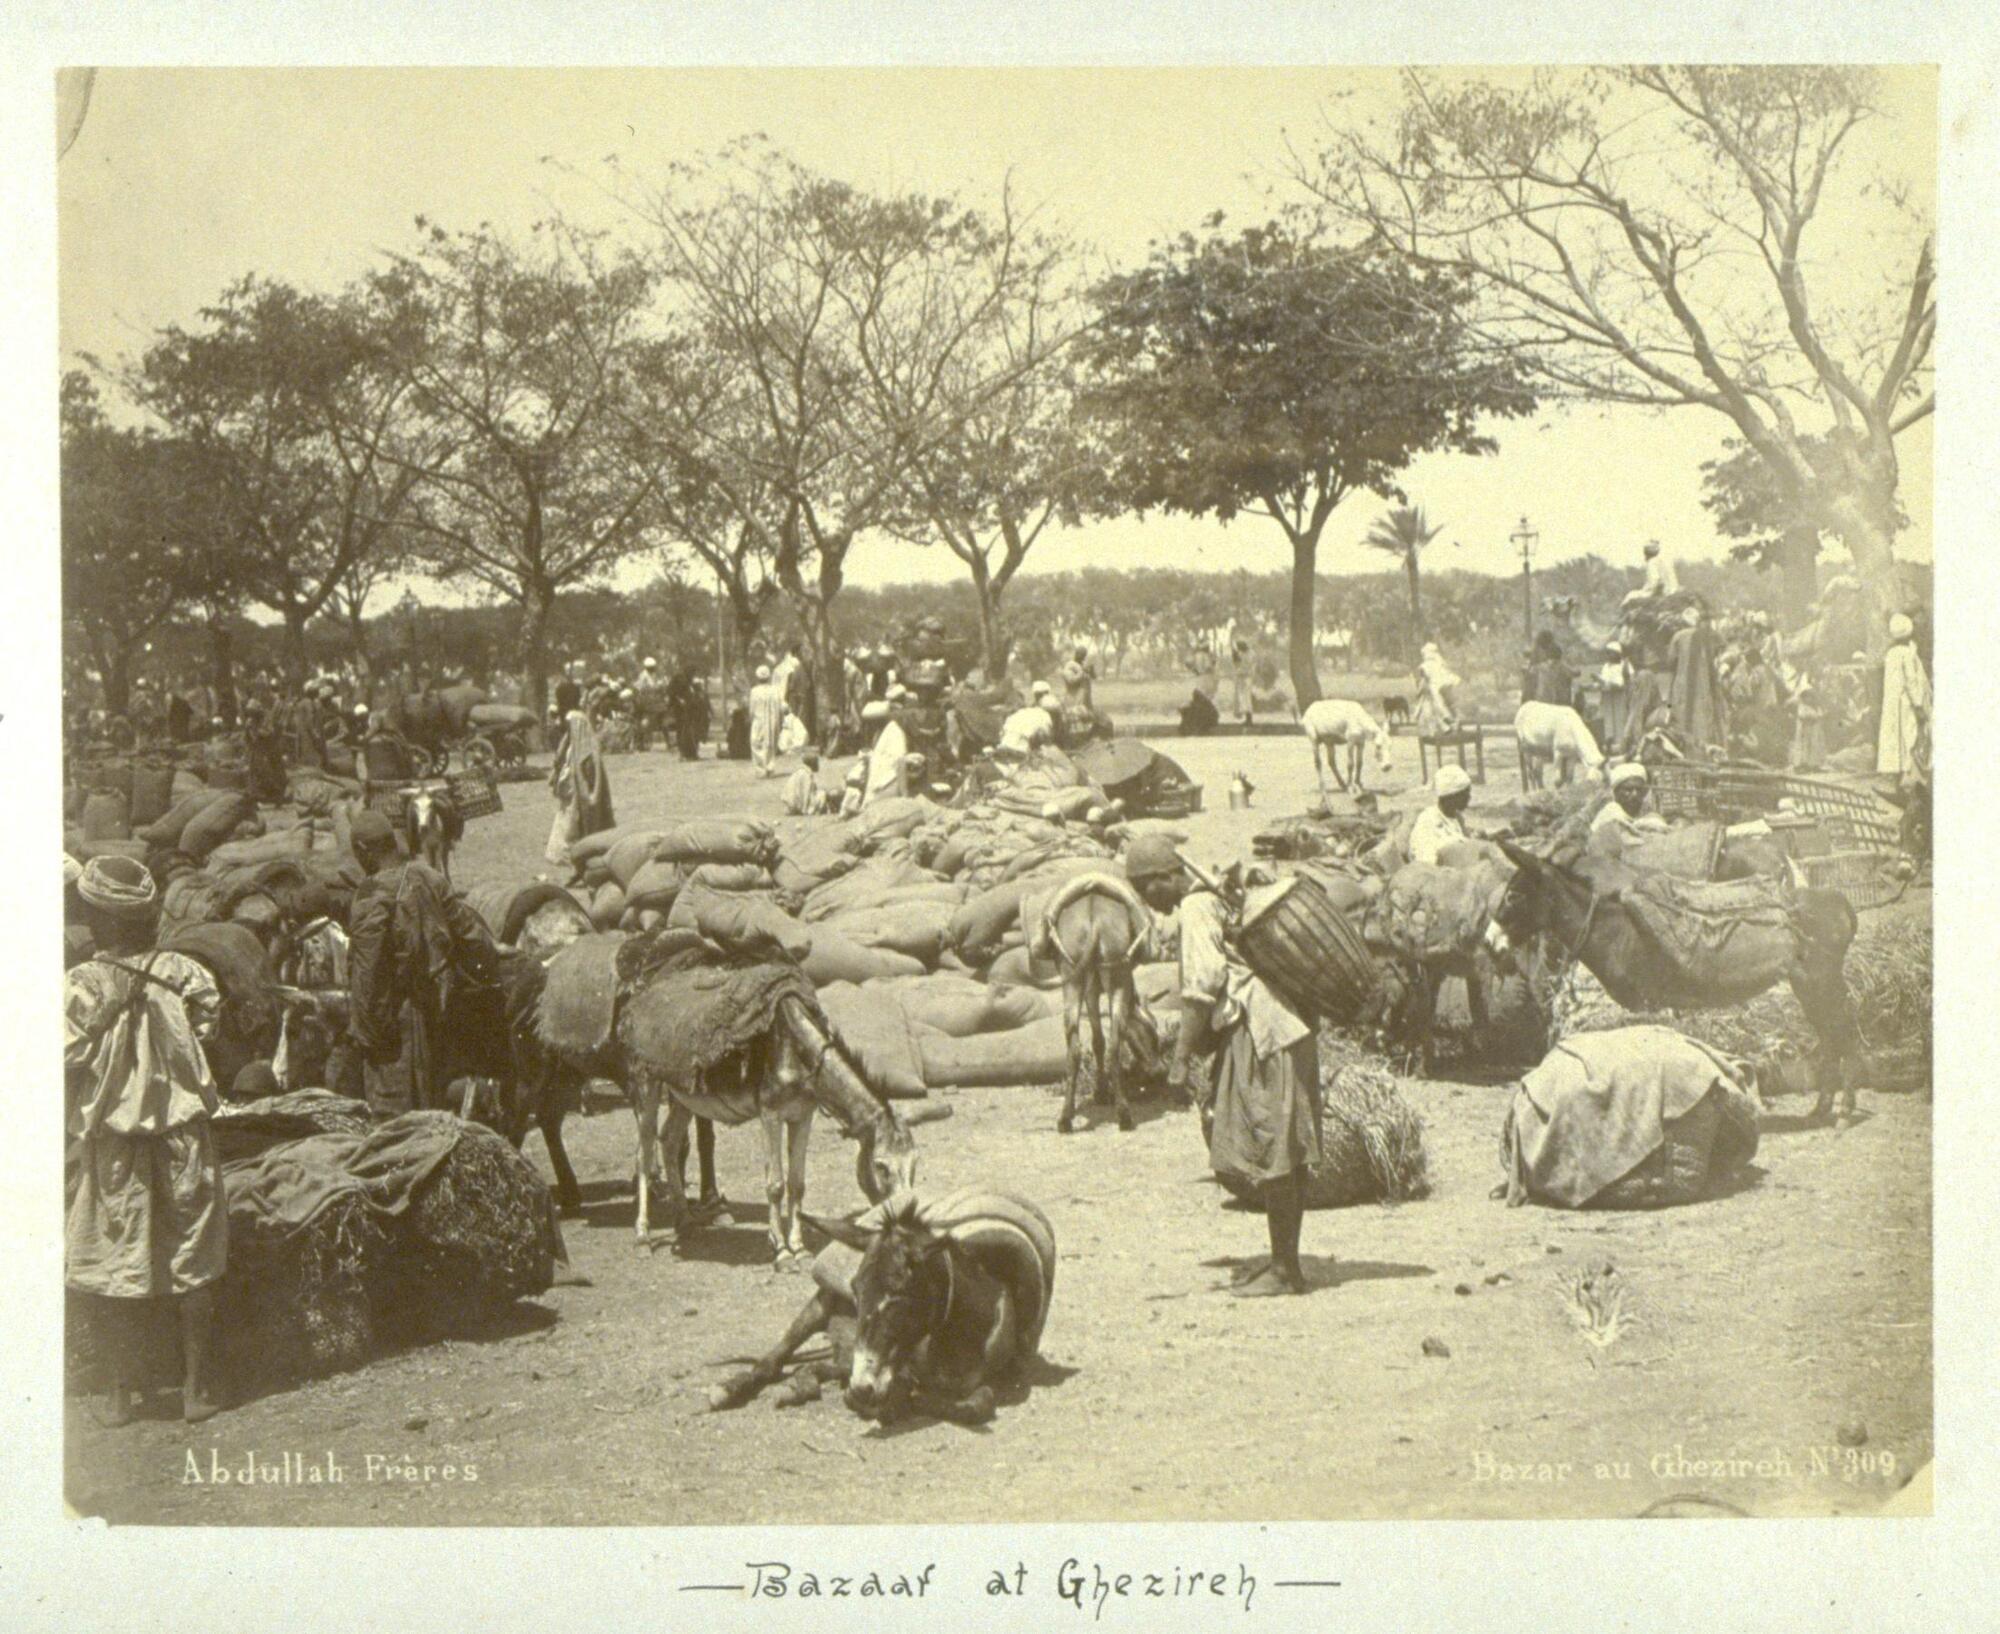 A group of men and pack animals gather in an outdoor space surrounded by trees. 